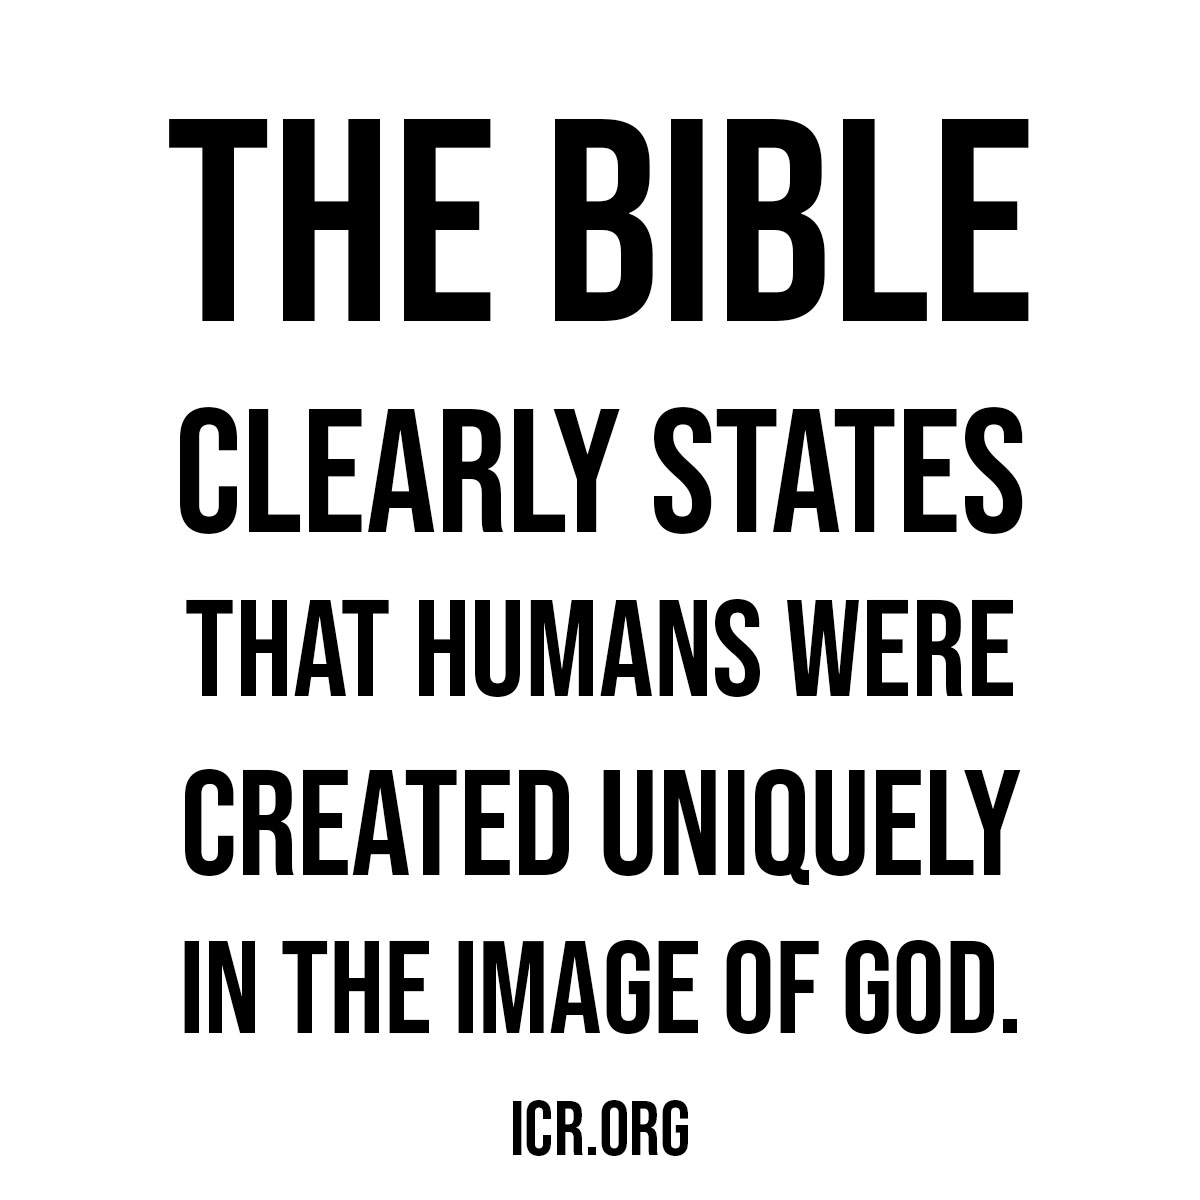 👨‍👩‍👧‍👦 The Bible clearly states that humans were created uniquely in the image of God. #QuoteOfTheDay #MadeInGodsImage